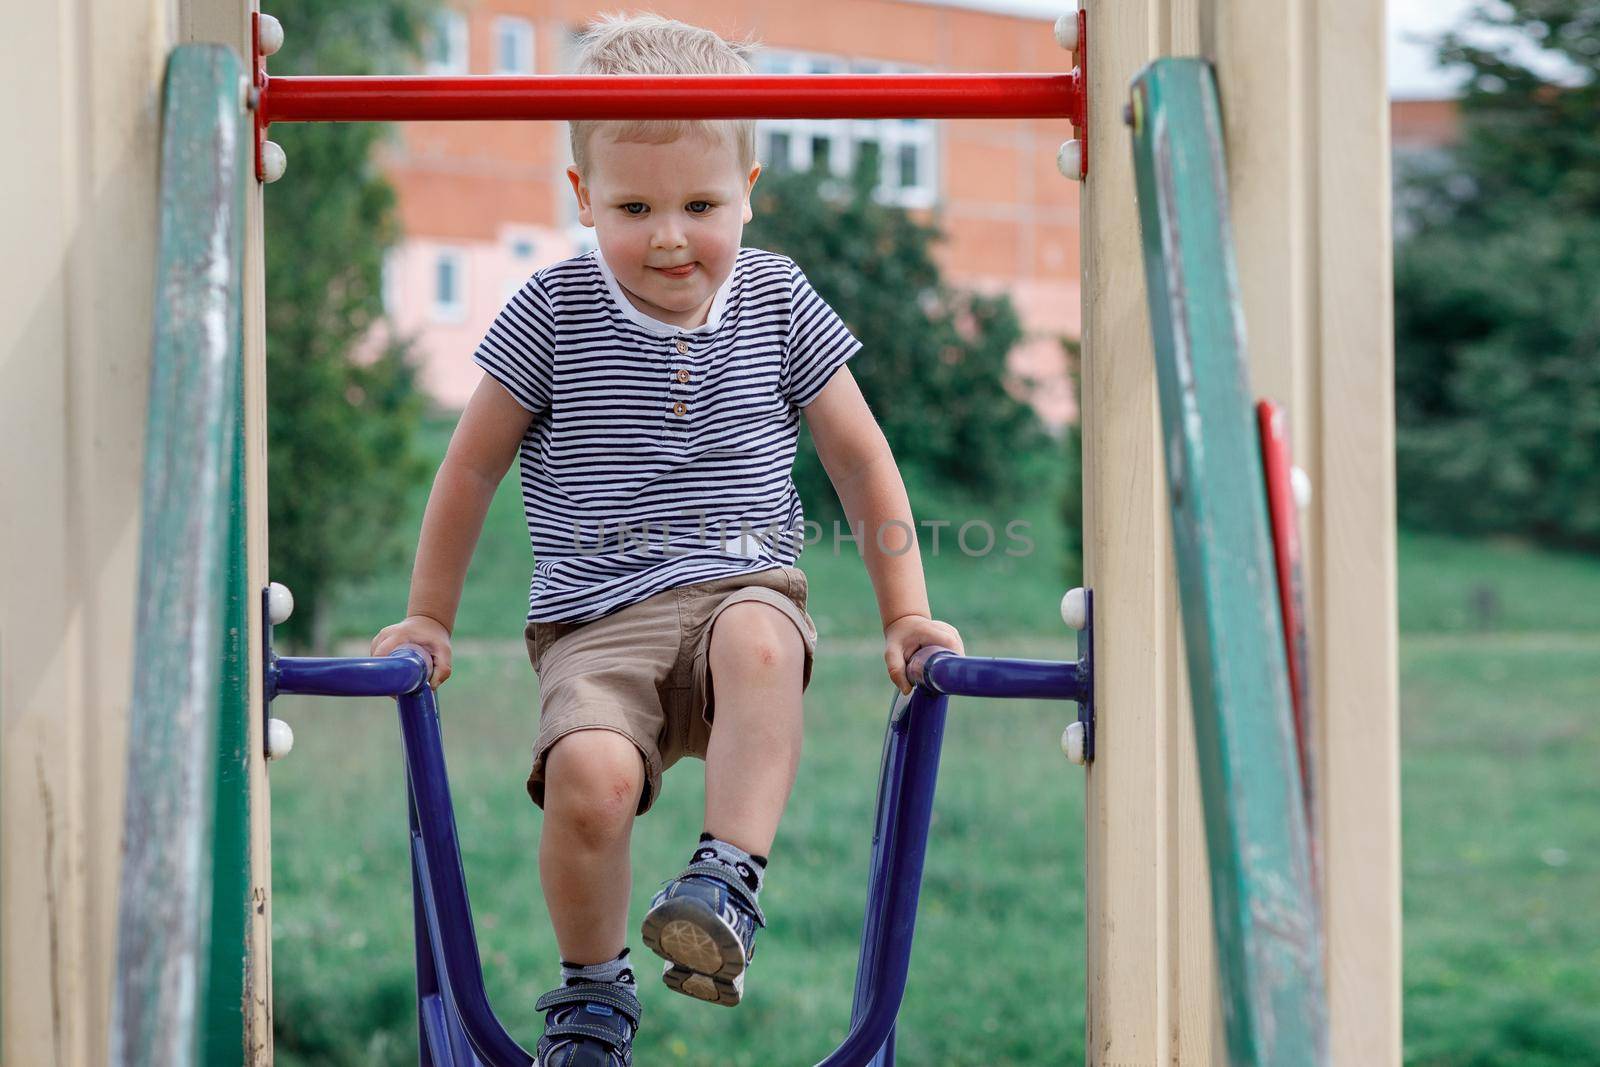 A small boy climbs up to playhouse at public playground in summer time